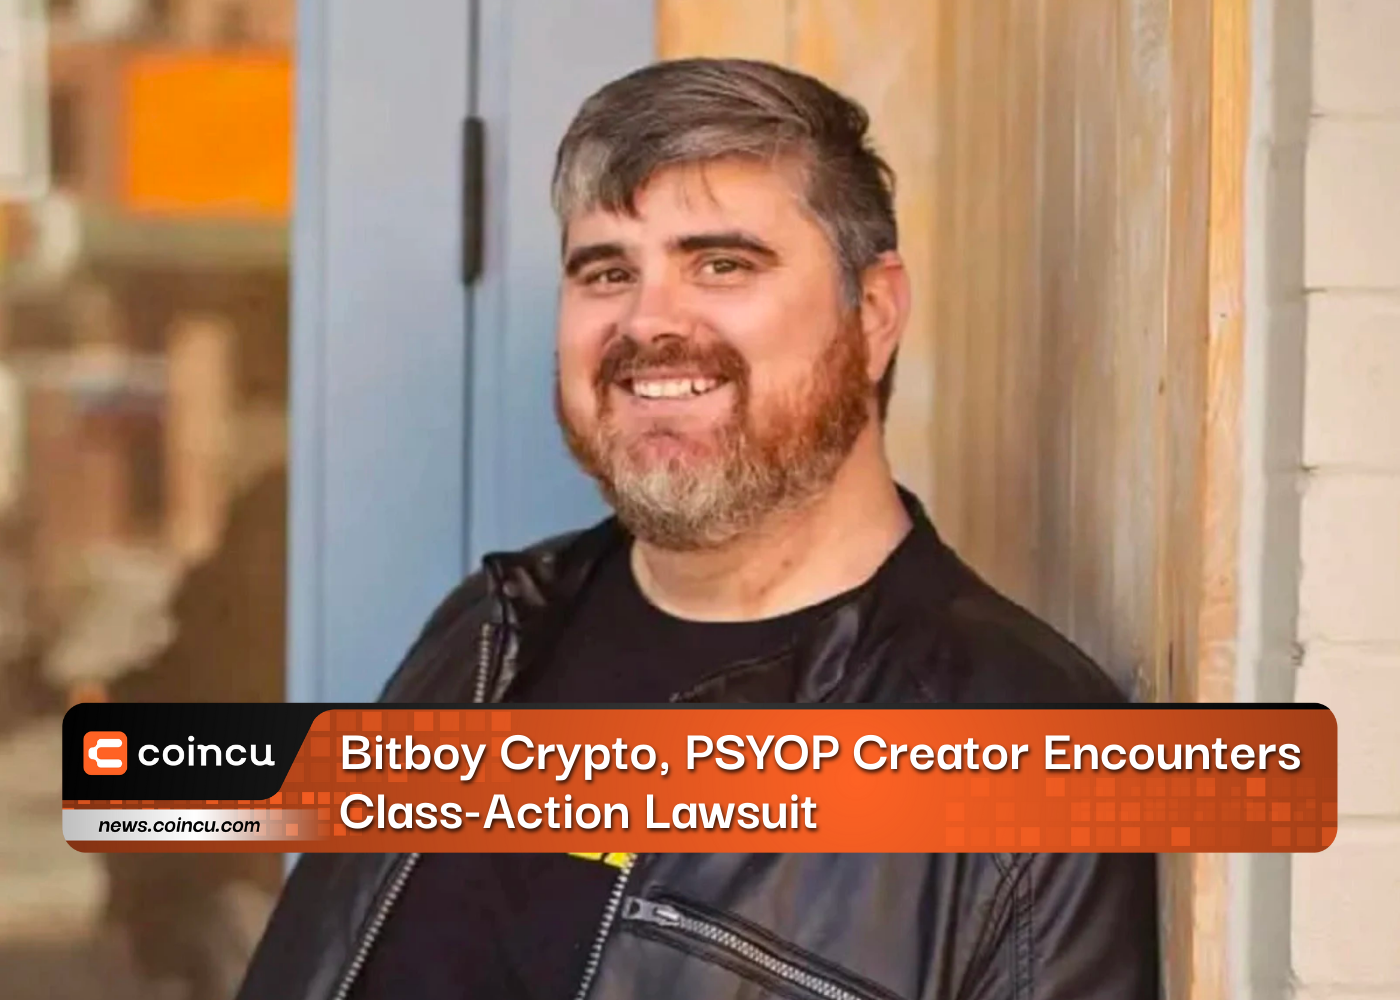 Bitboy Crypto, PSYOP Creator Encounters Class-Action Lawsuit